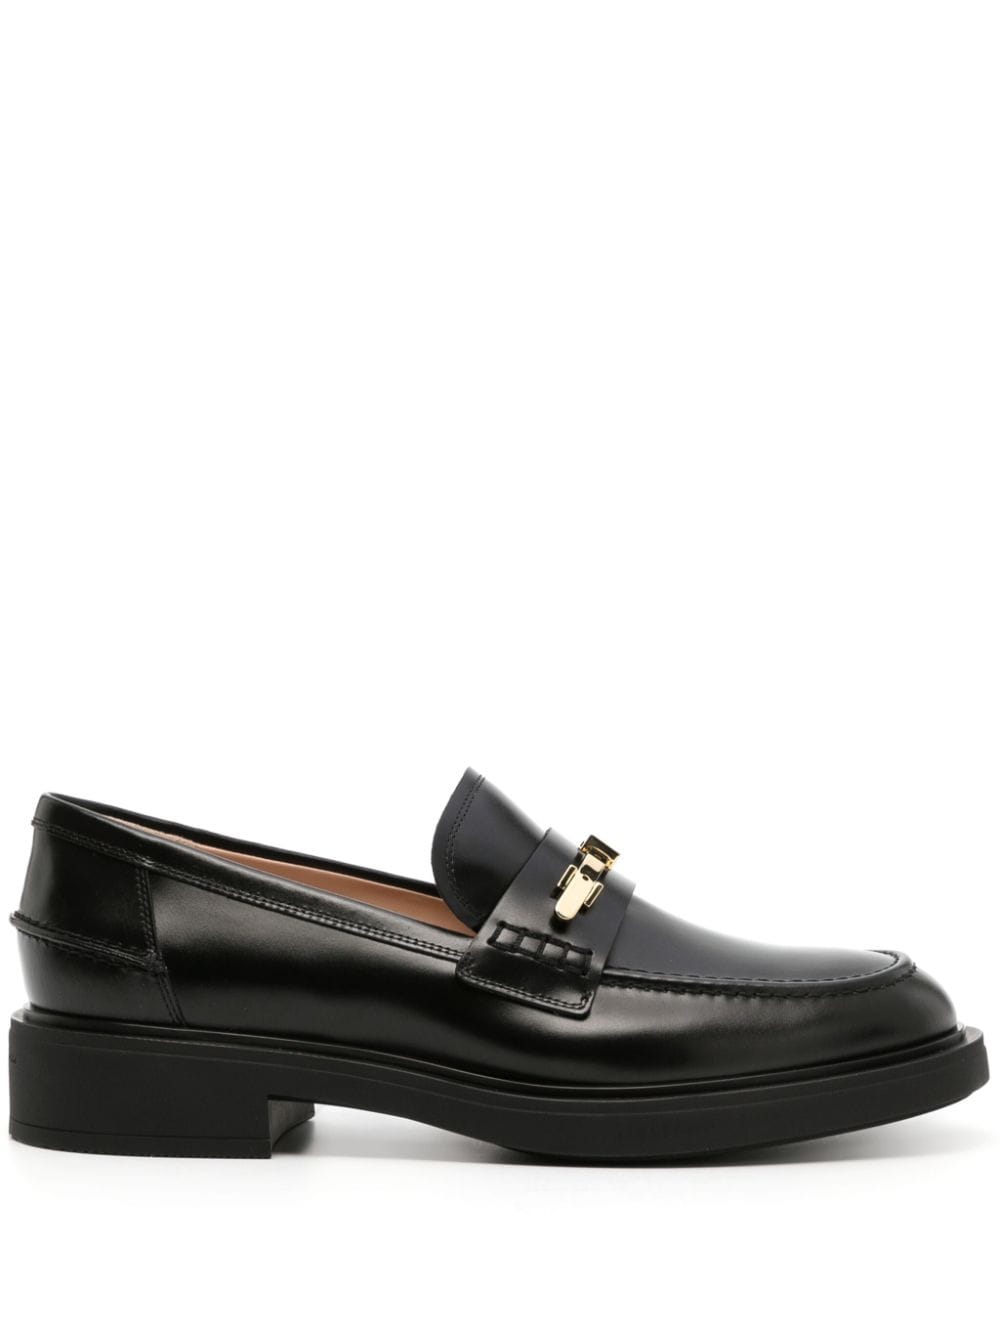 Gianvito Rossi Luxurious Black Leather Loafers